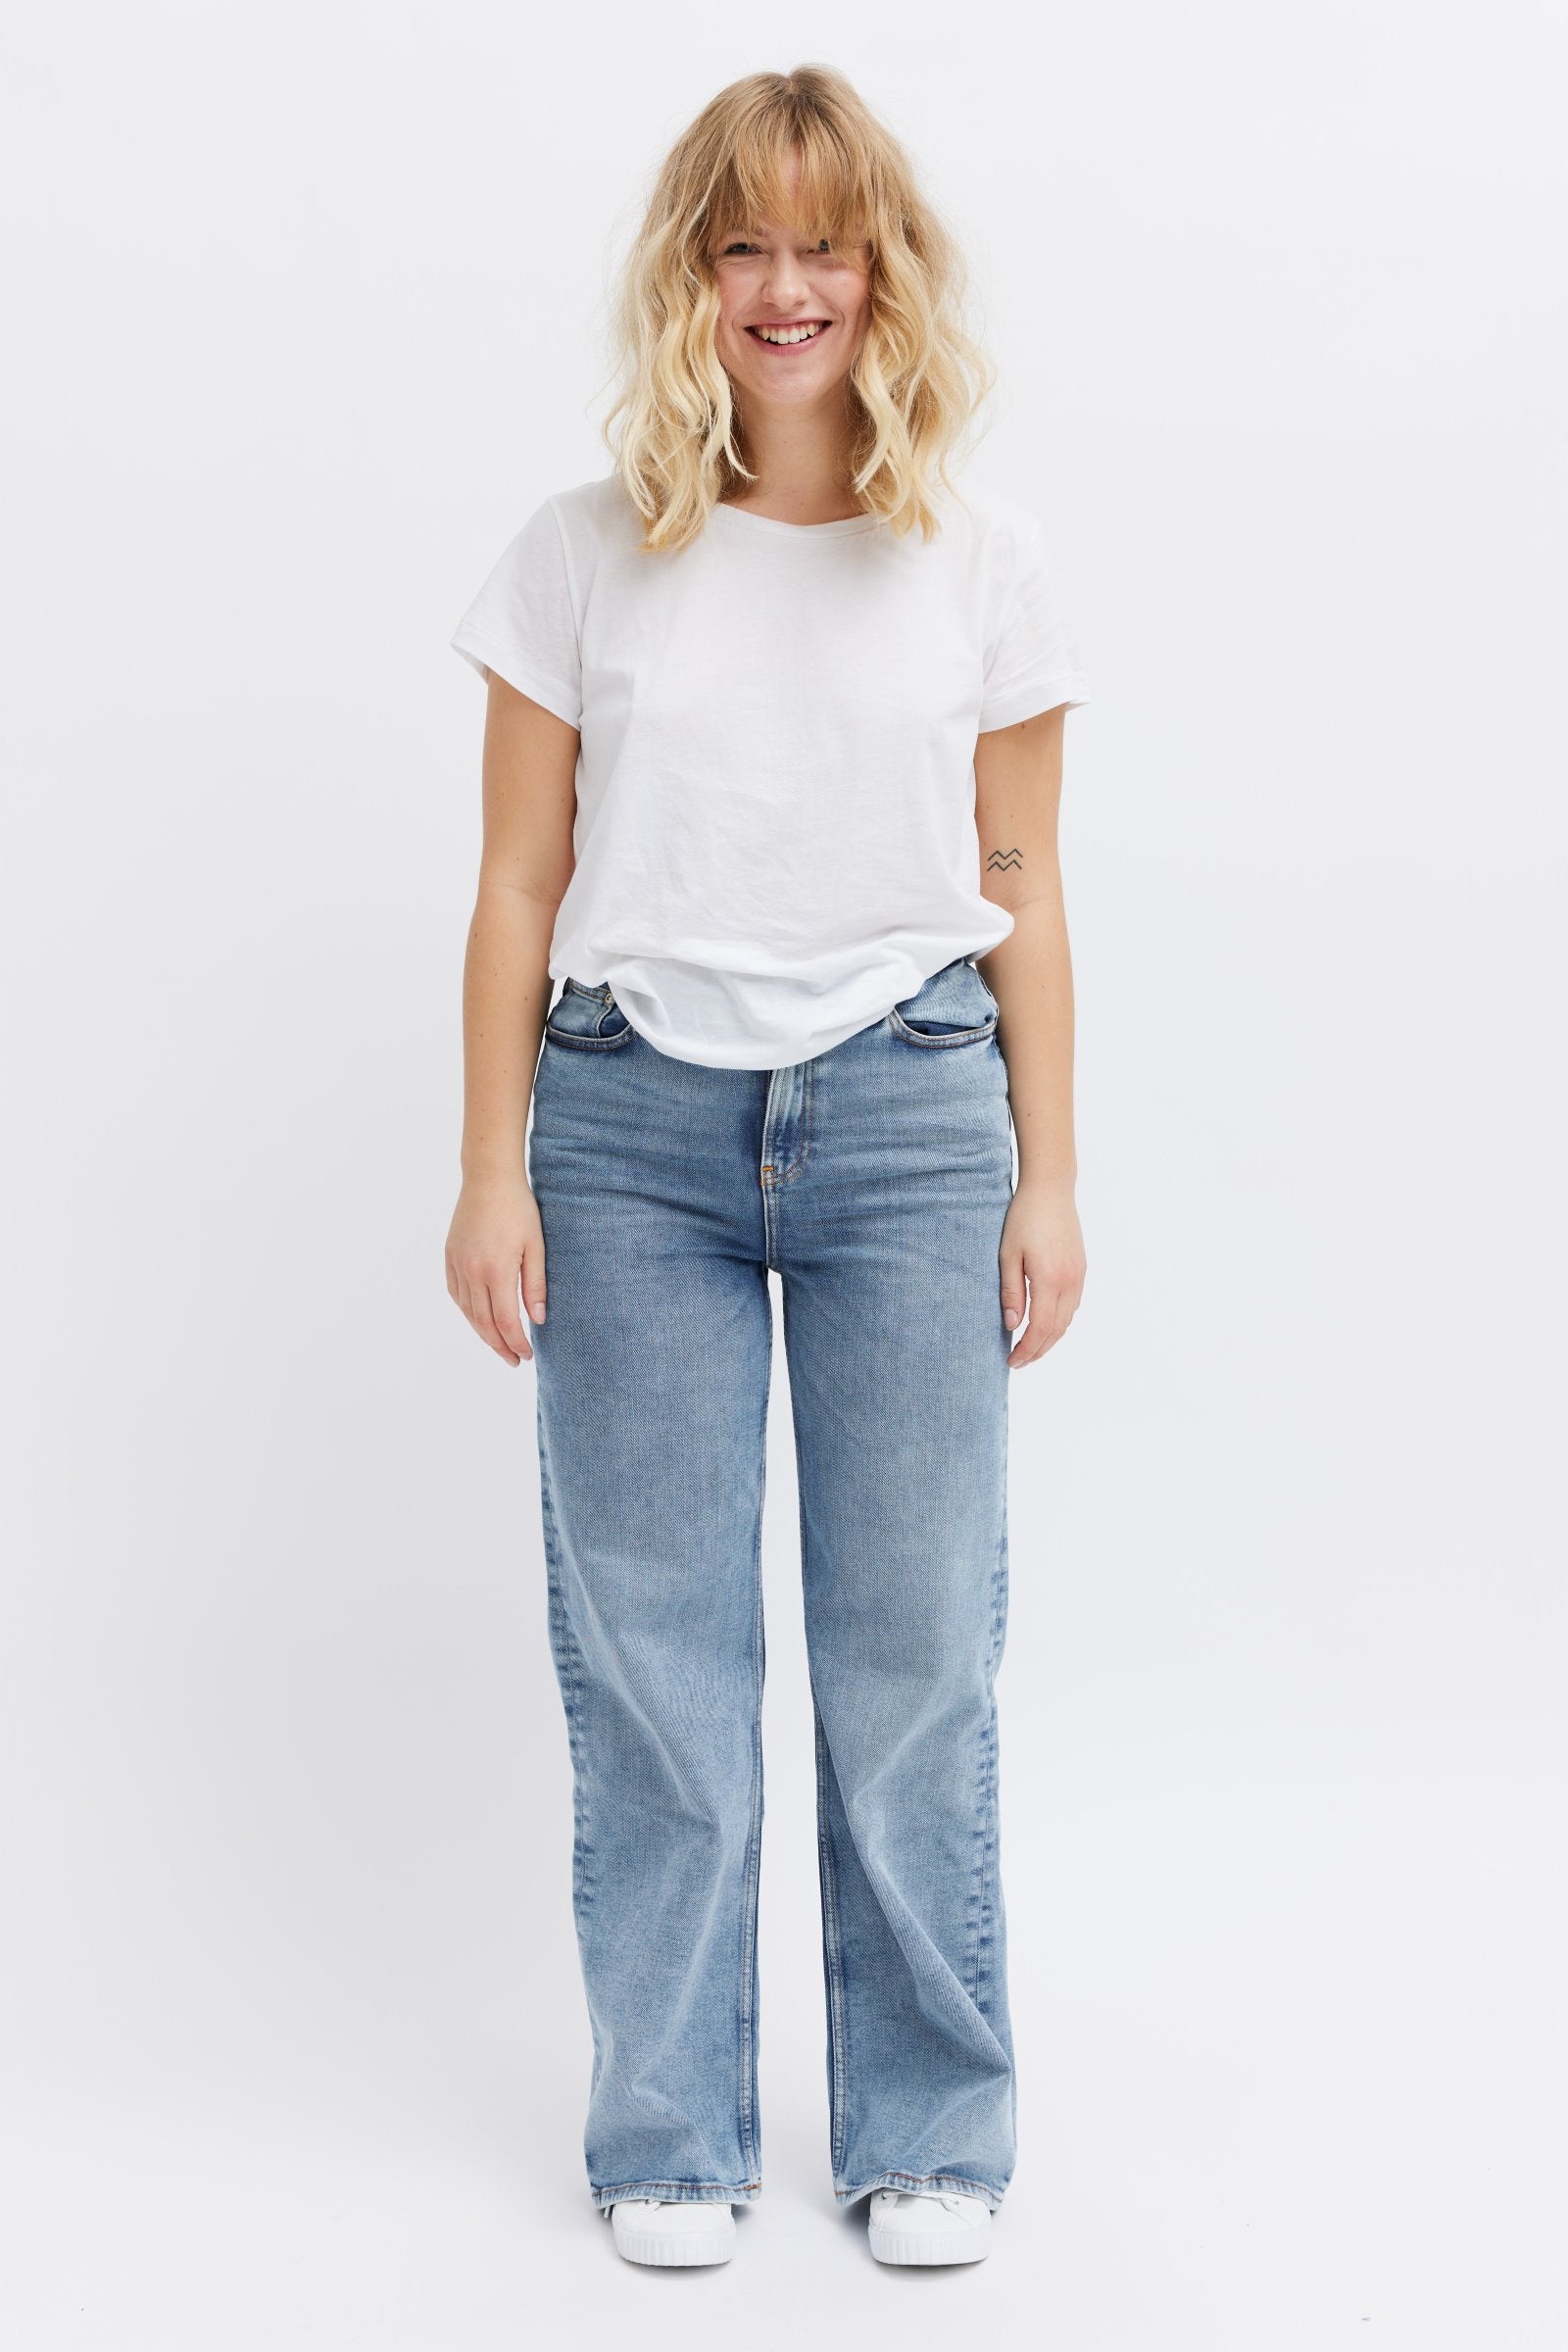  Comfy wide leg jeans. Ethical fashion